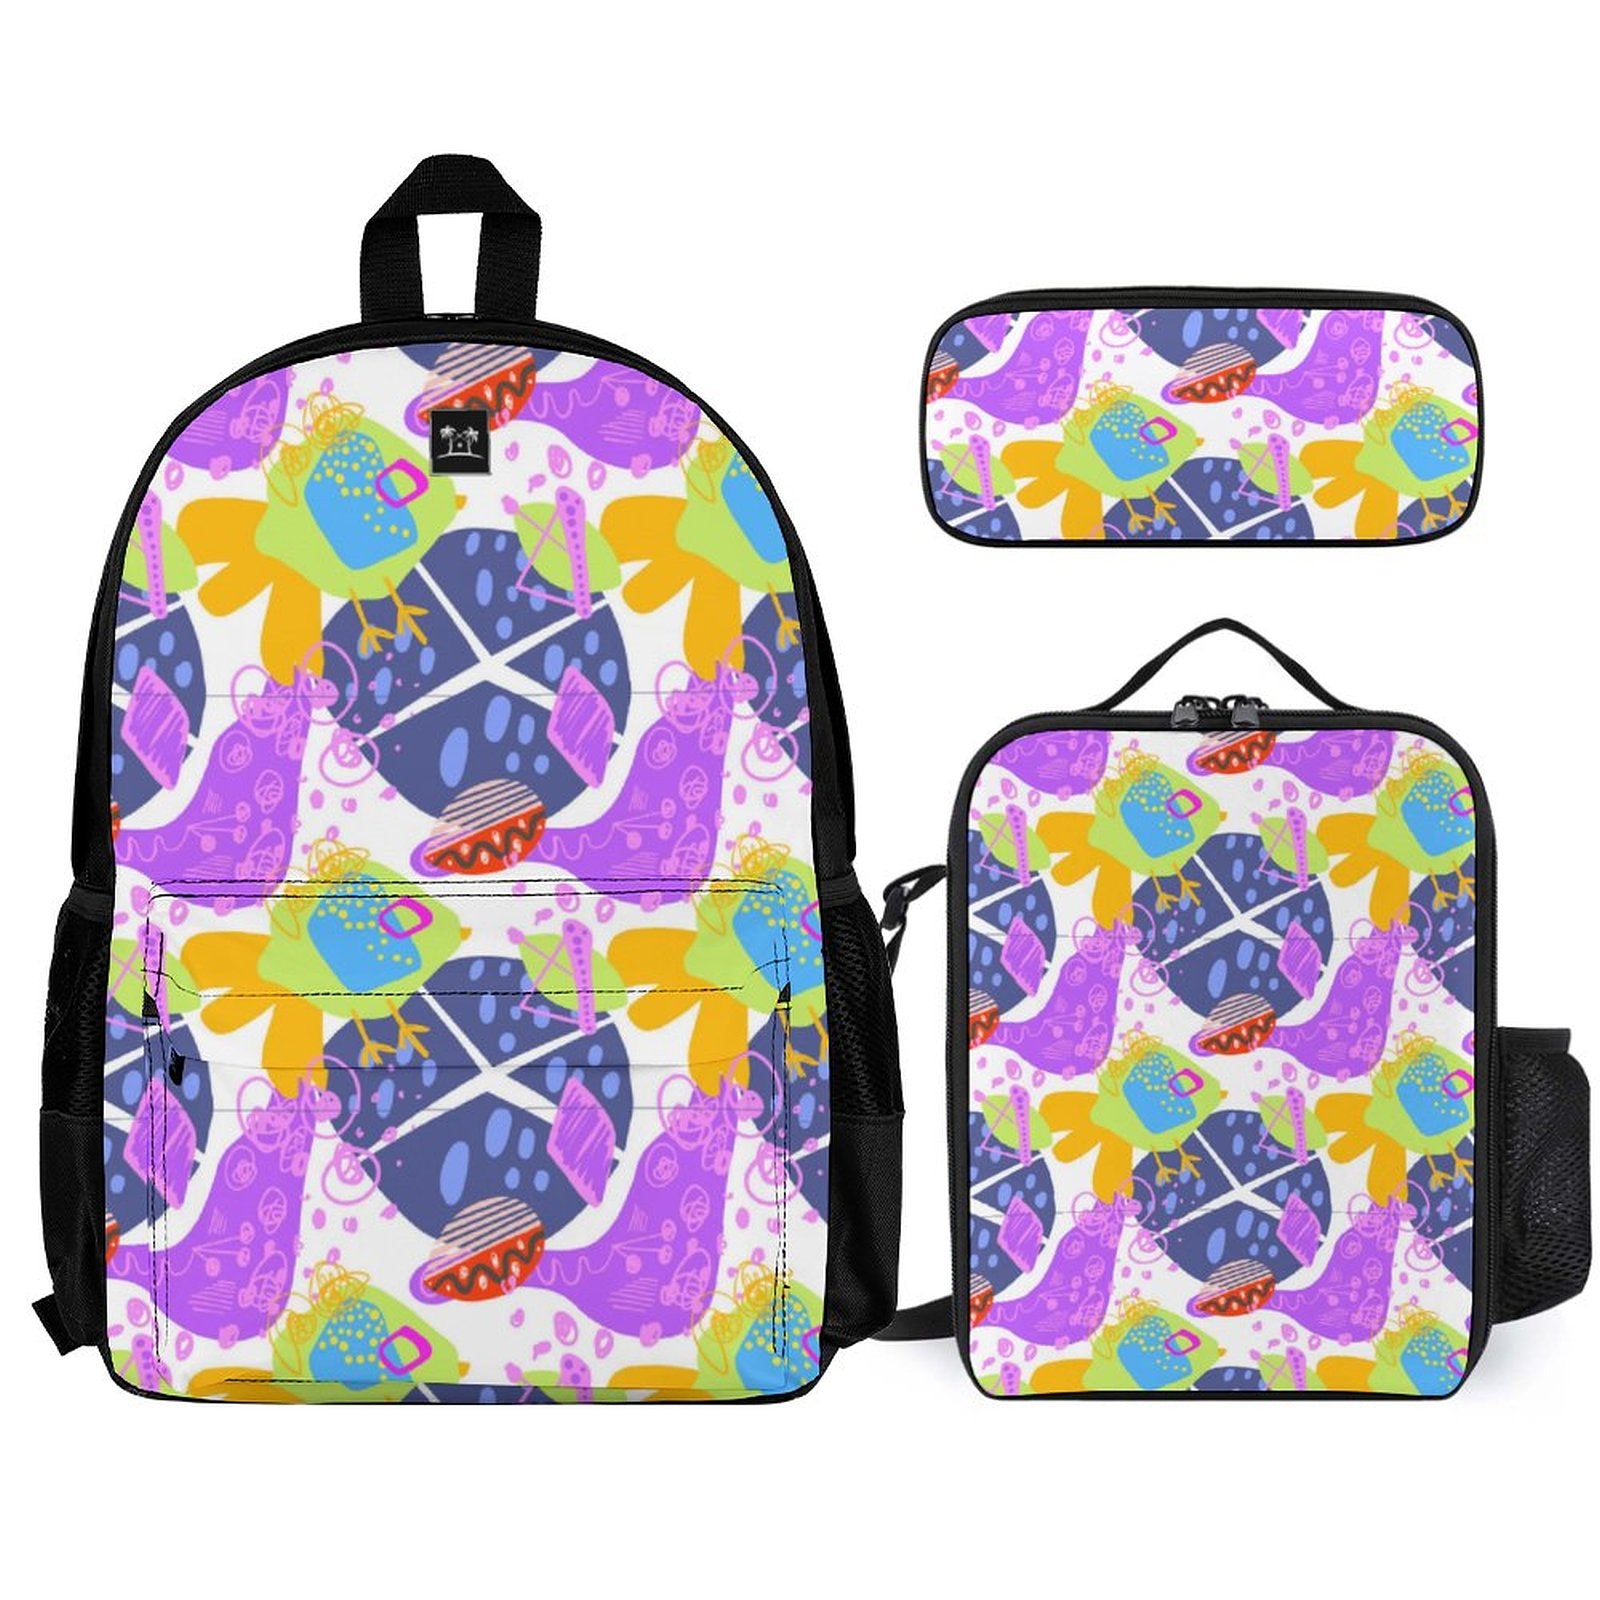 3-Piece Back-to-School Bag Set - Abstract Doodles